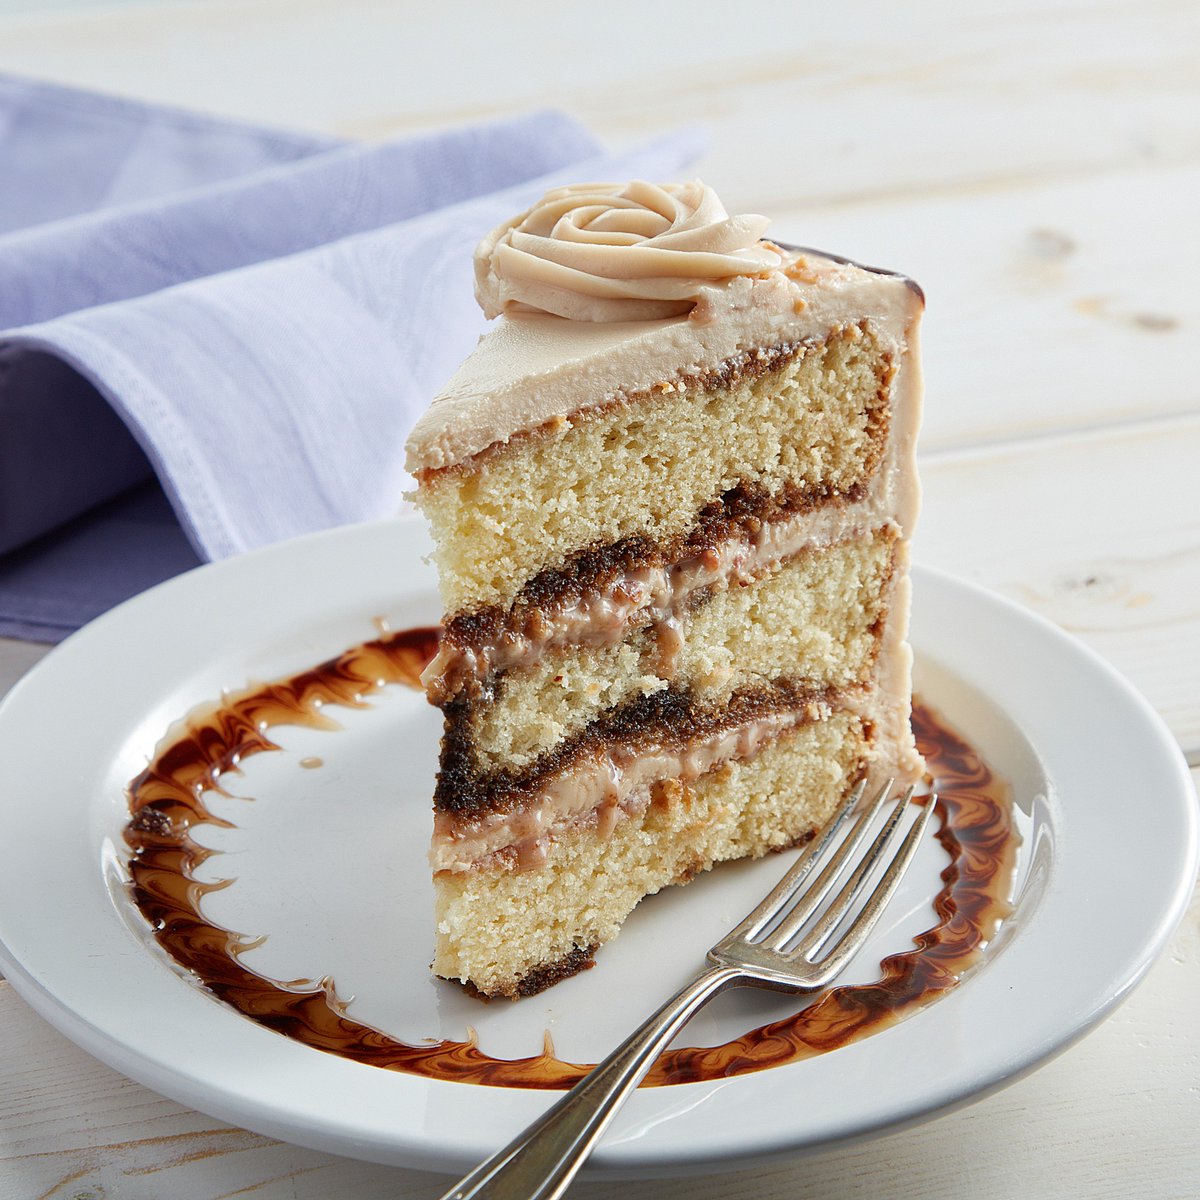 The Dessert Gallery Toffee-licious Cake: Yellow cake layers drizzled with espresso and filled with toffee bits and cream cheese frosting spiked with coffee liqueur. It's a coffee lover's dream. 🤩 ☕ Tag someone who needs to give this slice a try!